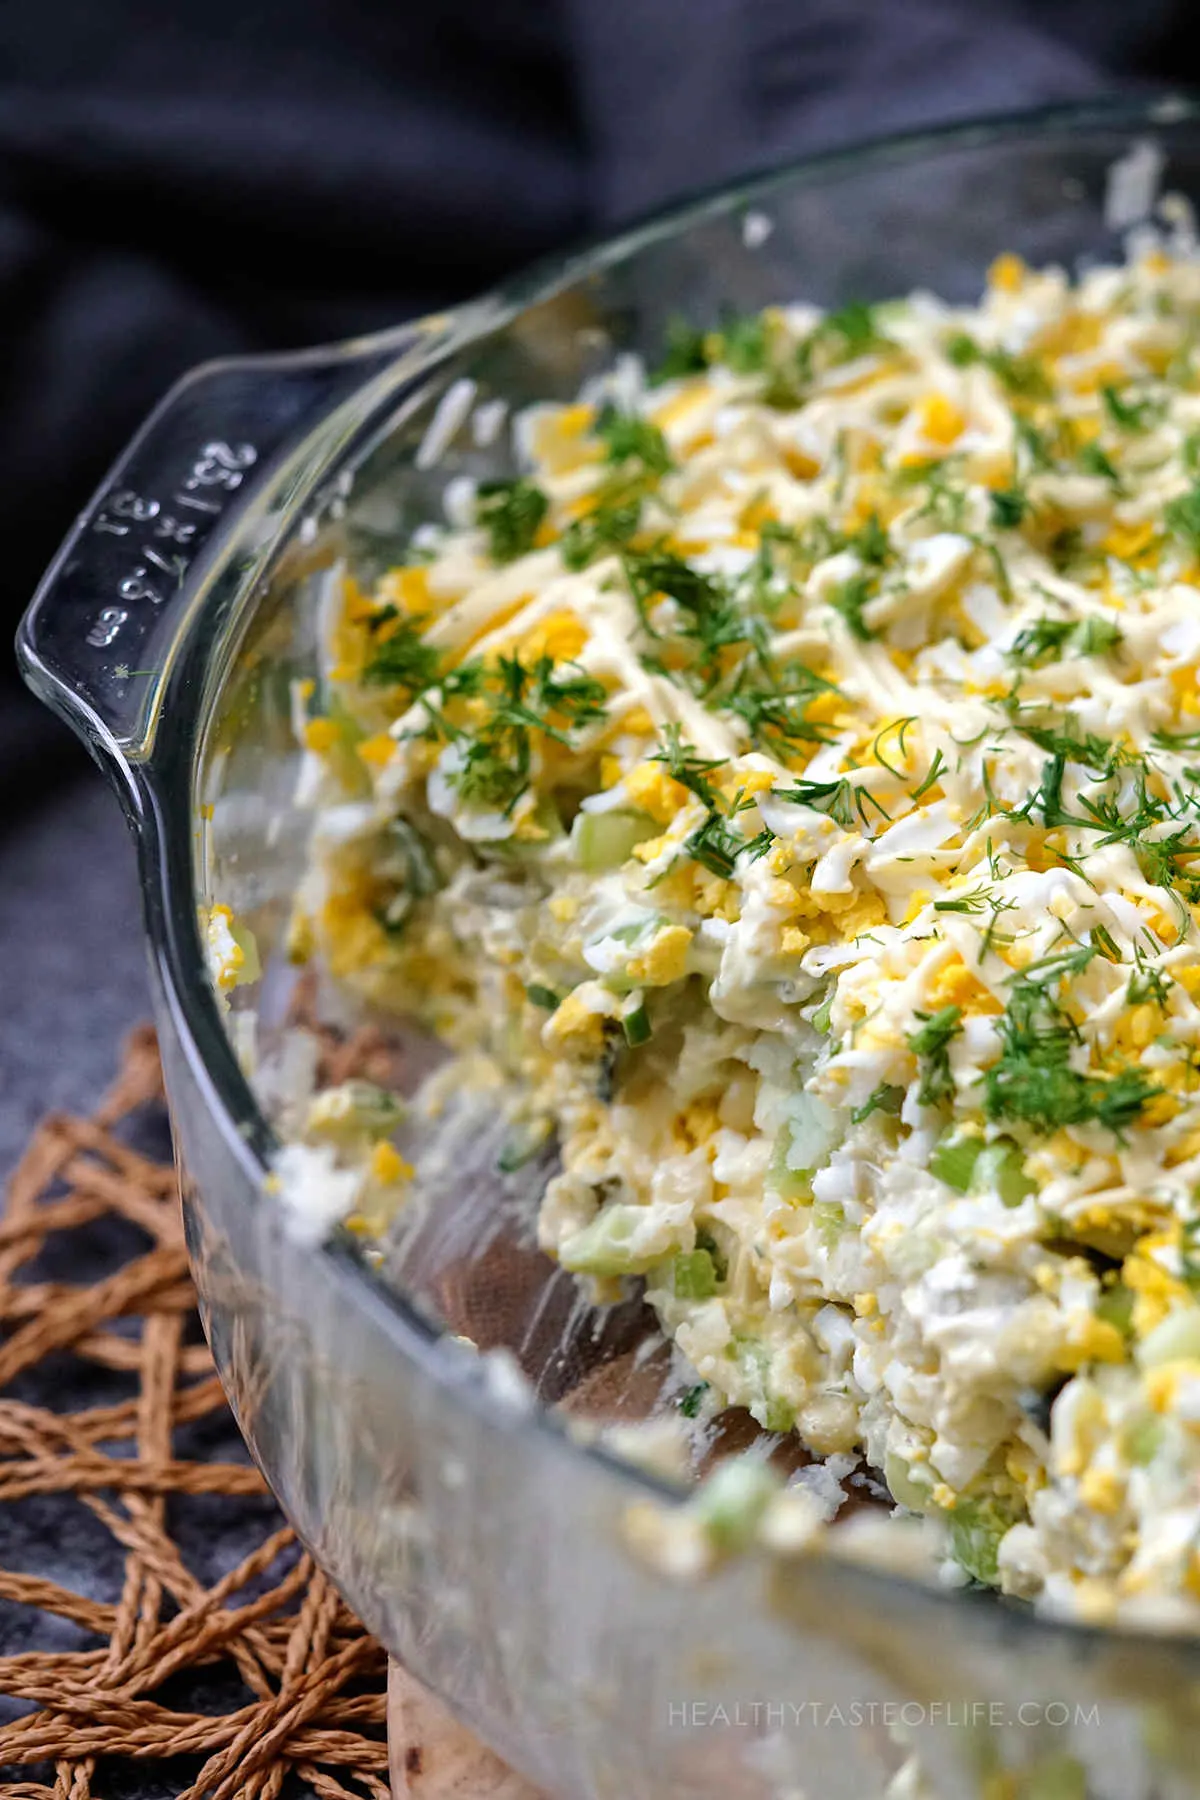 close up shot of potato & egg salad served in a glass dish for Easter, one partion removed showing inside layers ans structure.